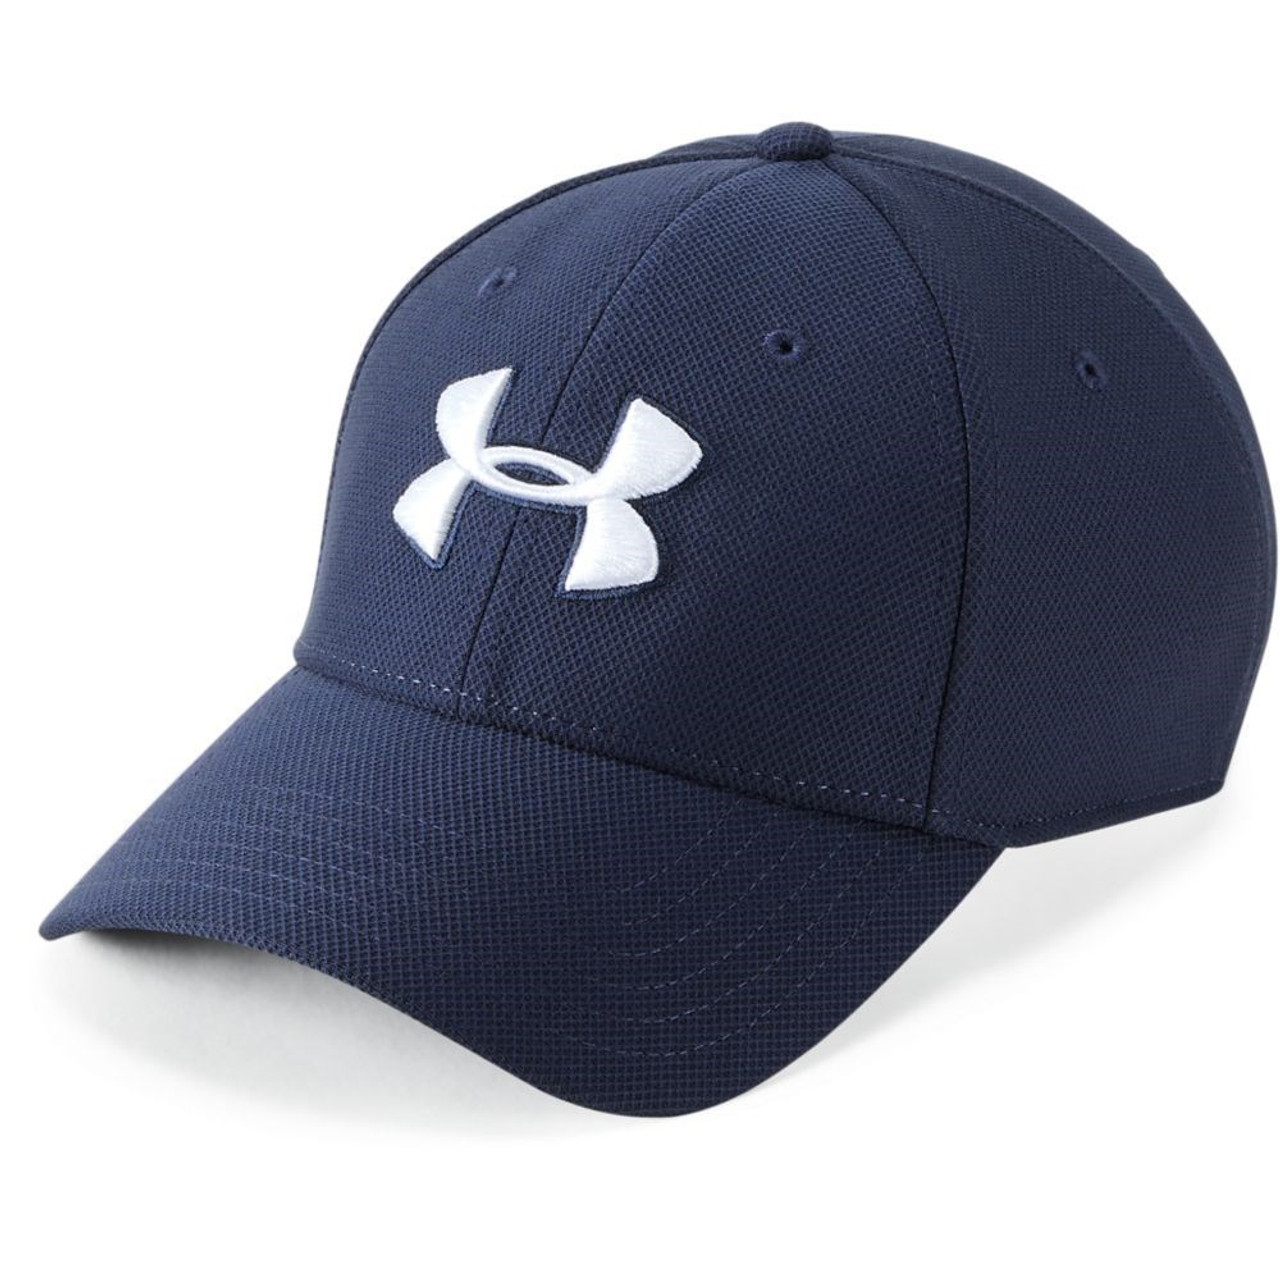 UNDER ARMOUR Men's Blitzing 3.0 Fitted Hat